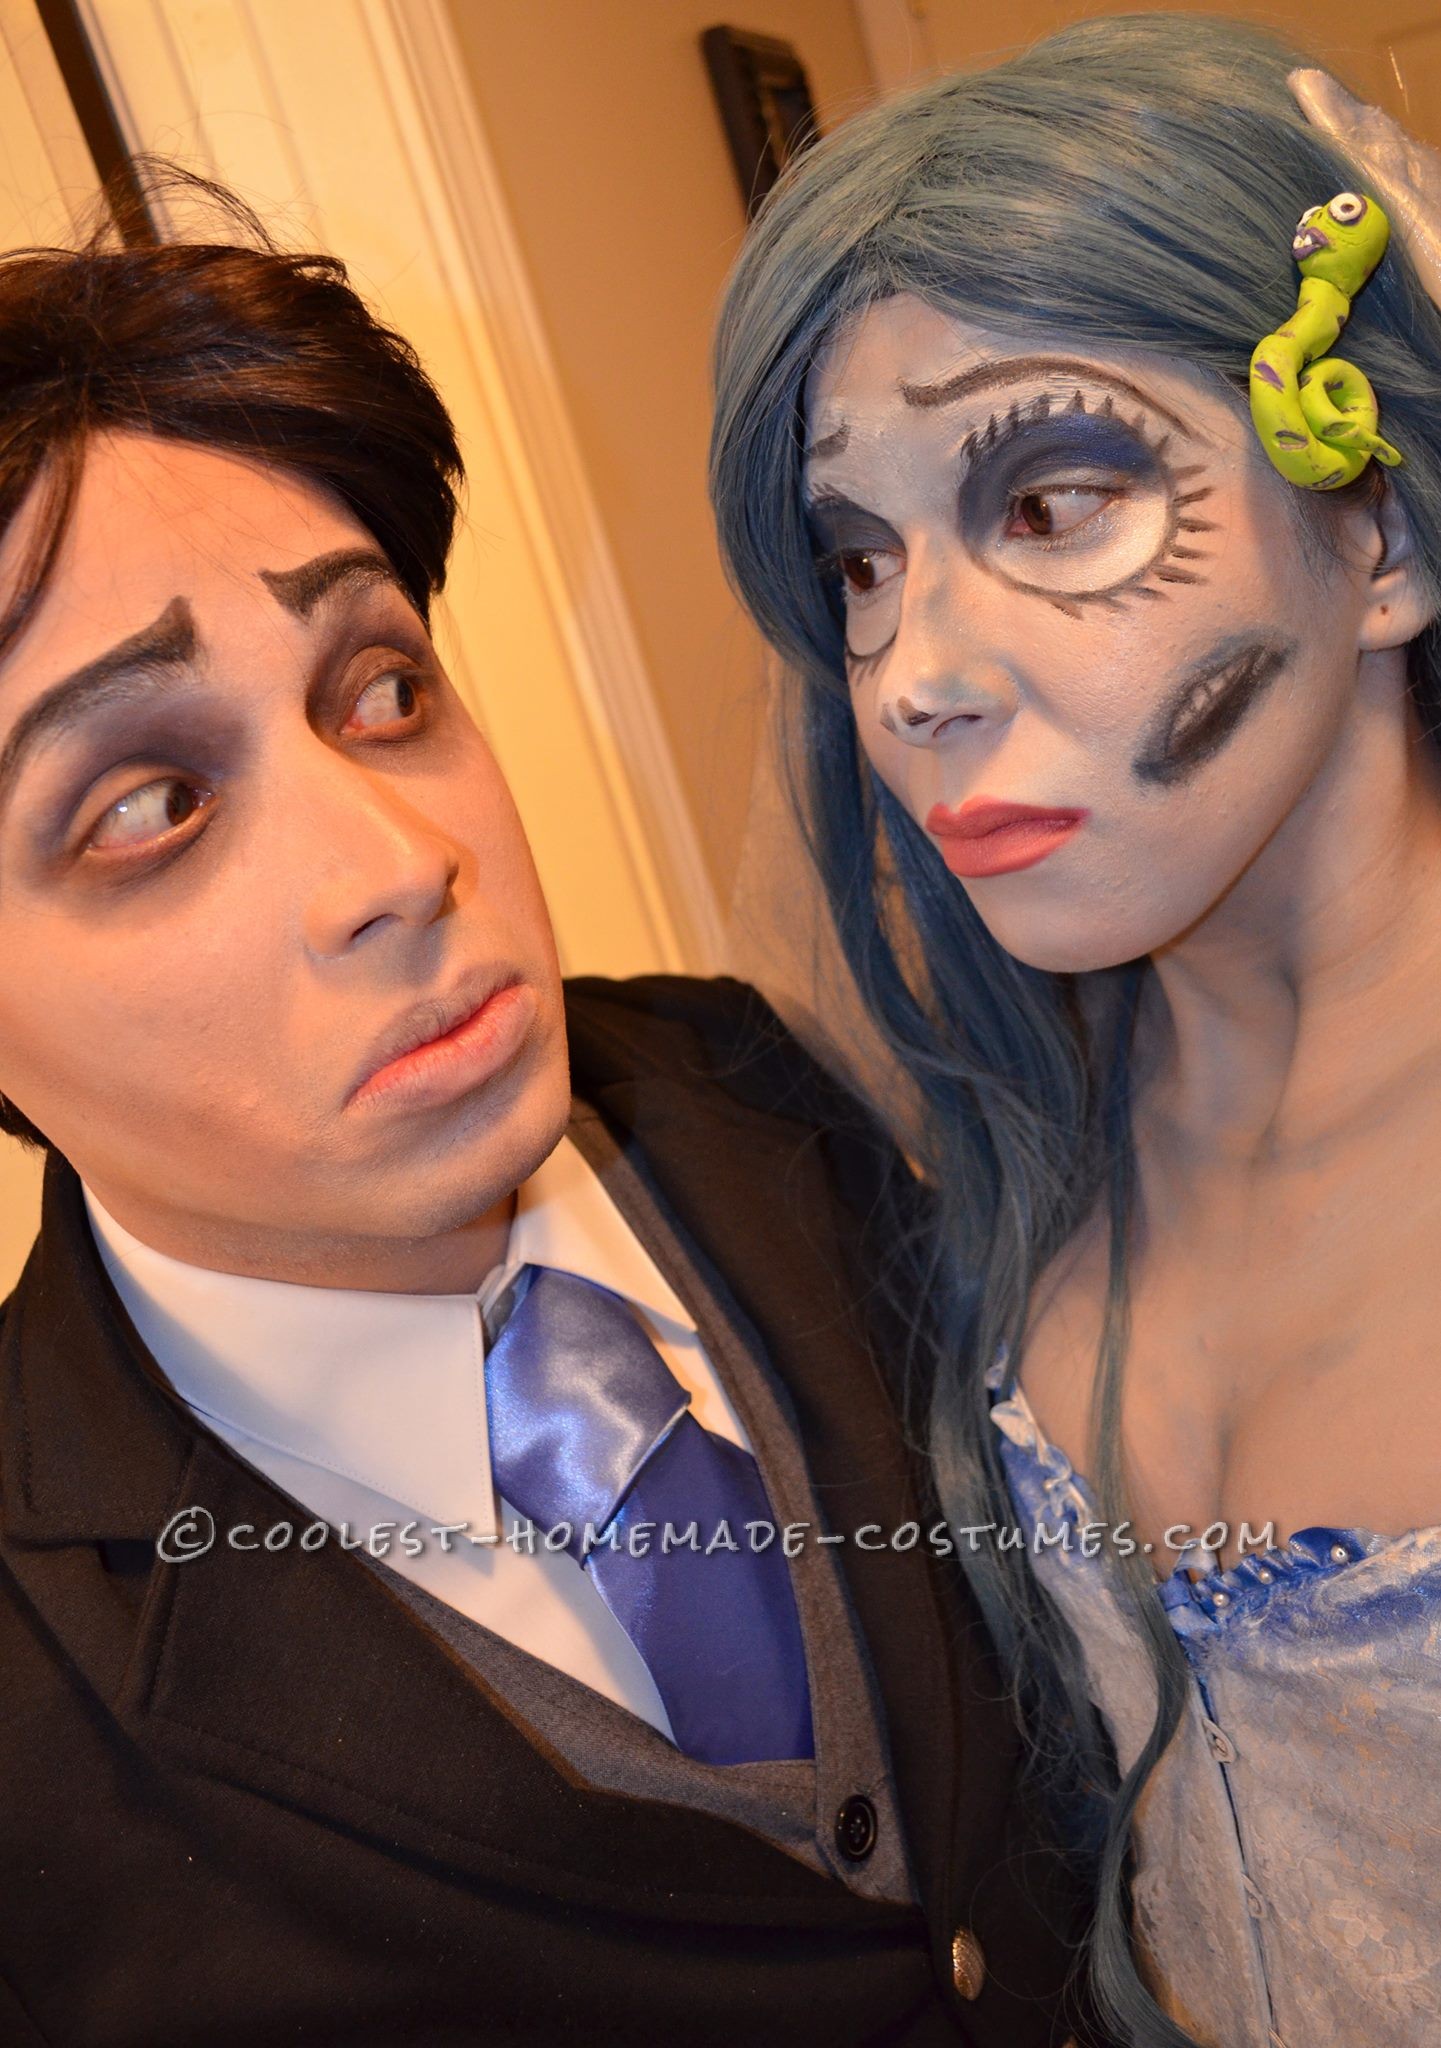 The Corpse Bride Couple Costume: Emily and Victor Van Dort